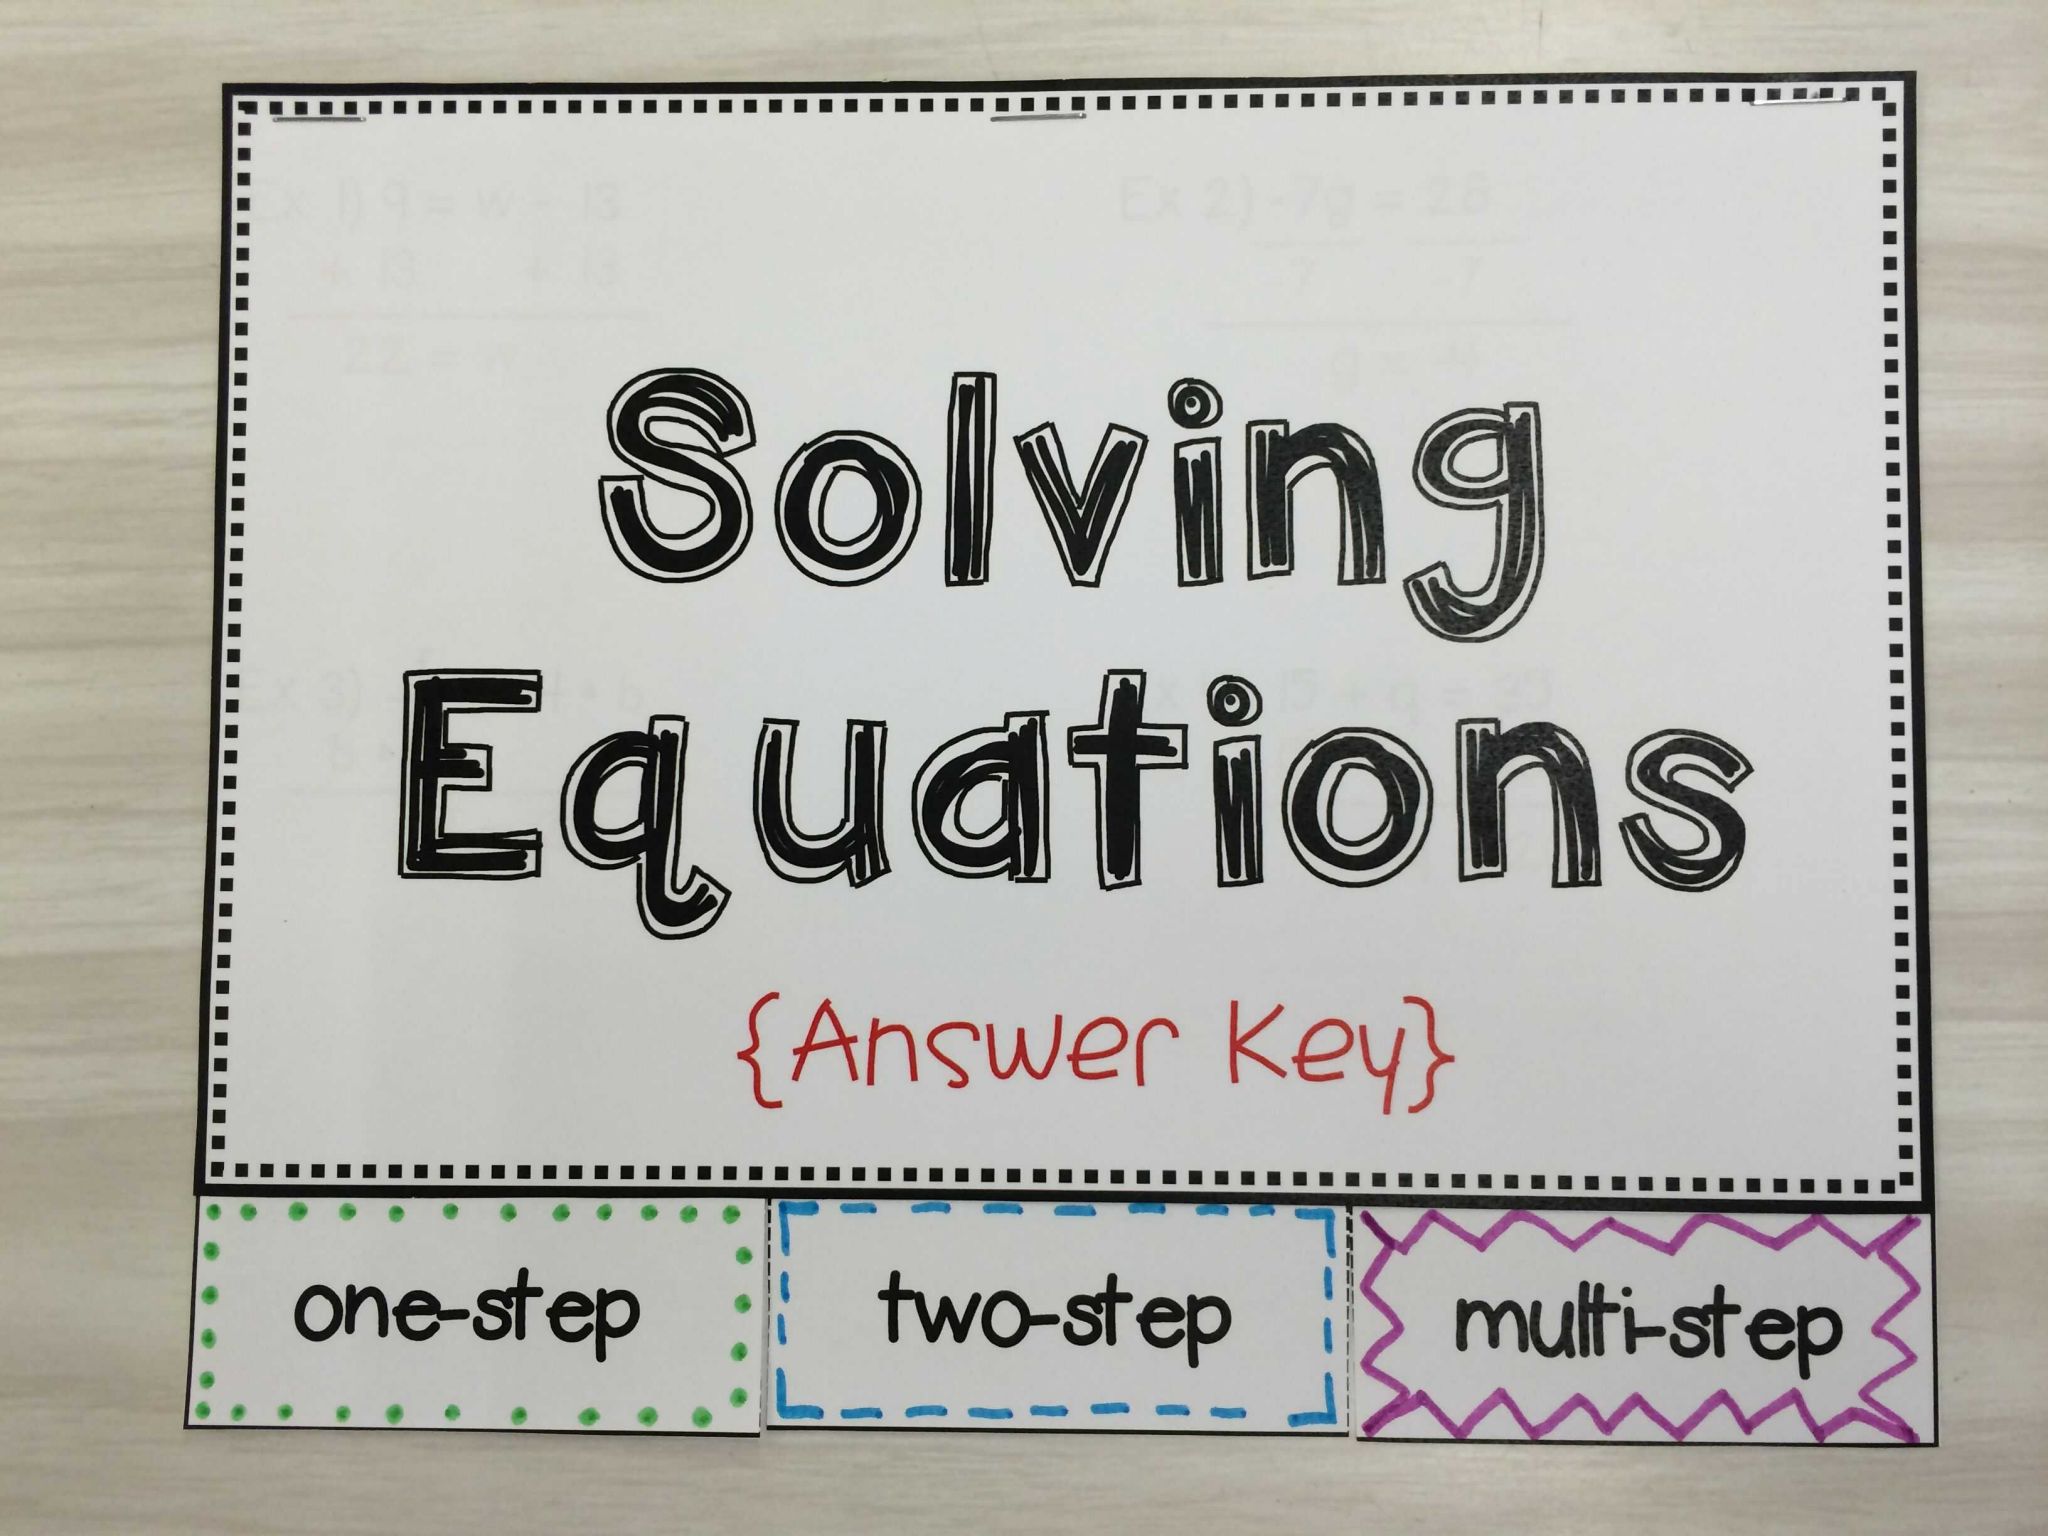 Solving Equations with Variables On Both Sides Worksheet Answers Along with Interactive Notebook Three Tab Book for solving One Step Two Step